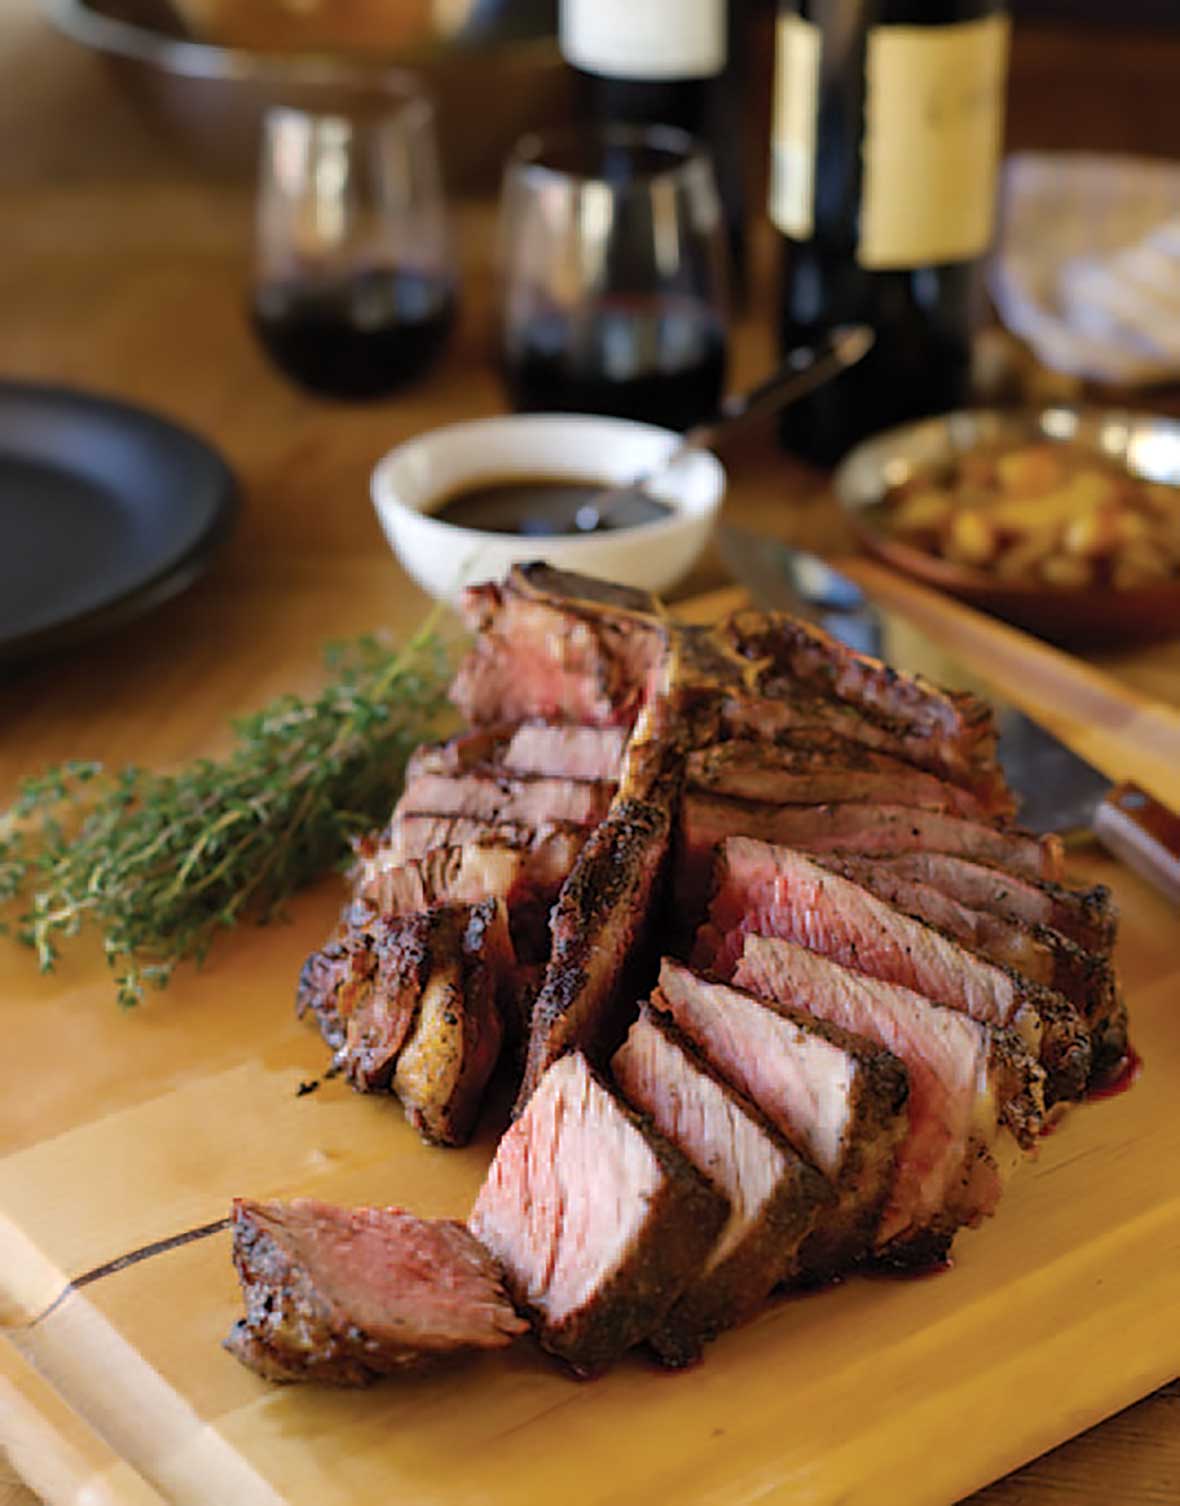 A grilled porterhouse steak sliced on a wooden cutting board, flanked by fresh thyme and a white bowl of steak sauce, a bottle of red wine, and two glasses of wine.